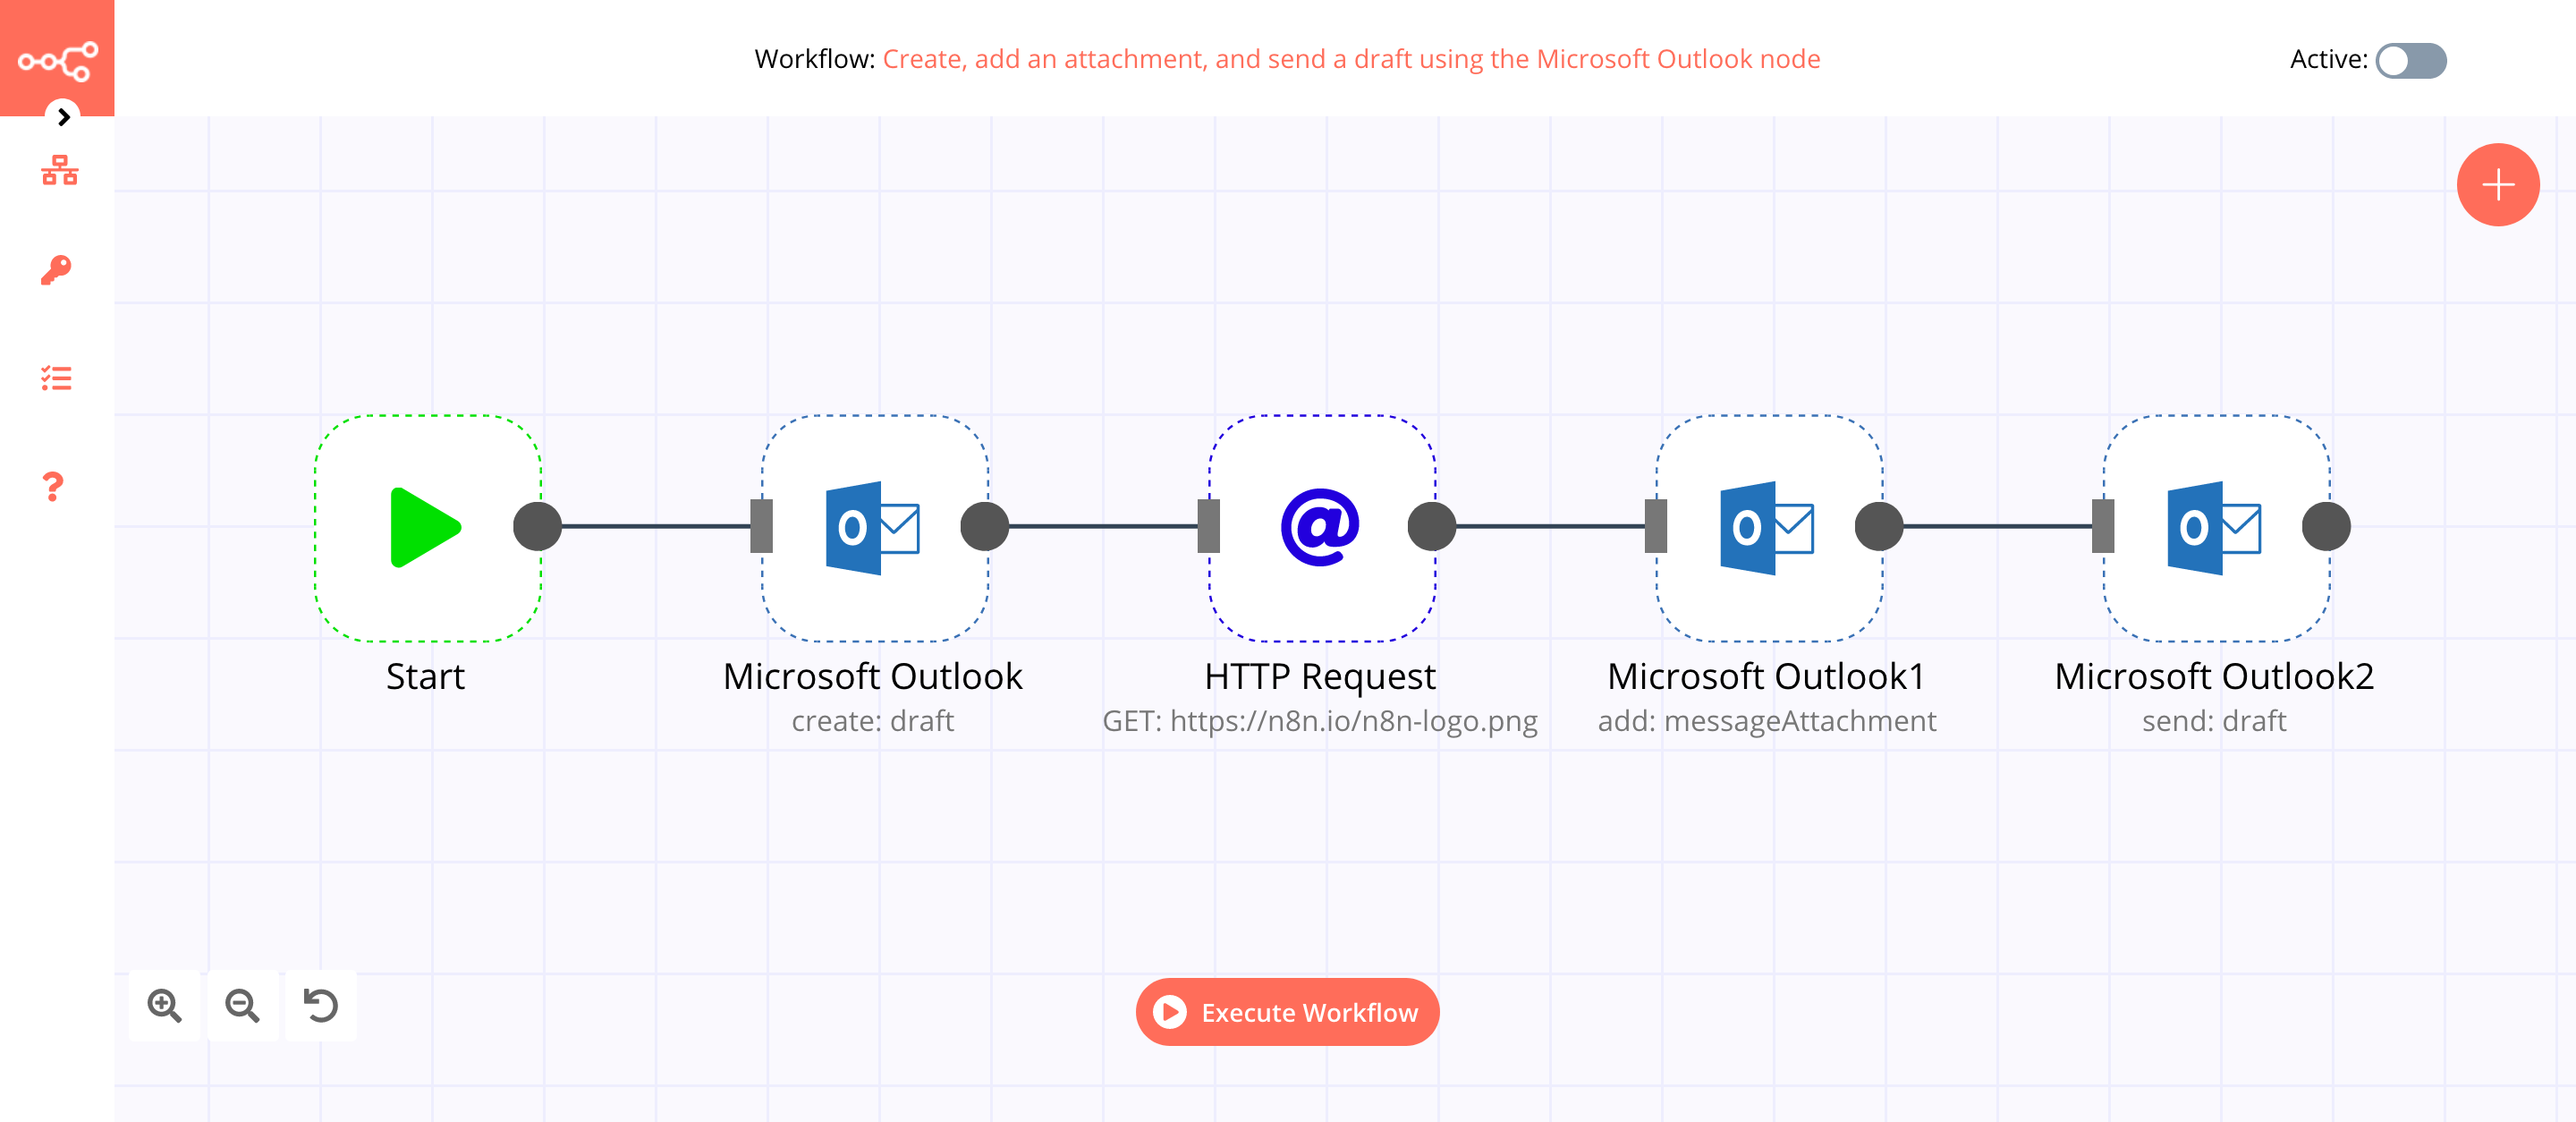 A workflow with the Microsoft Outlook node